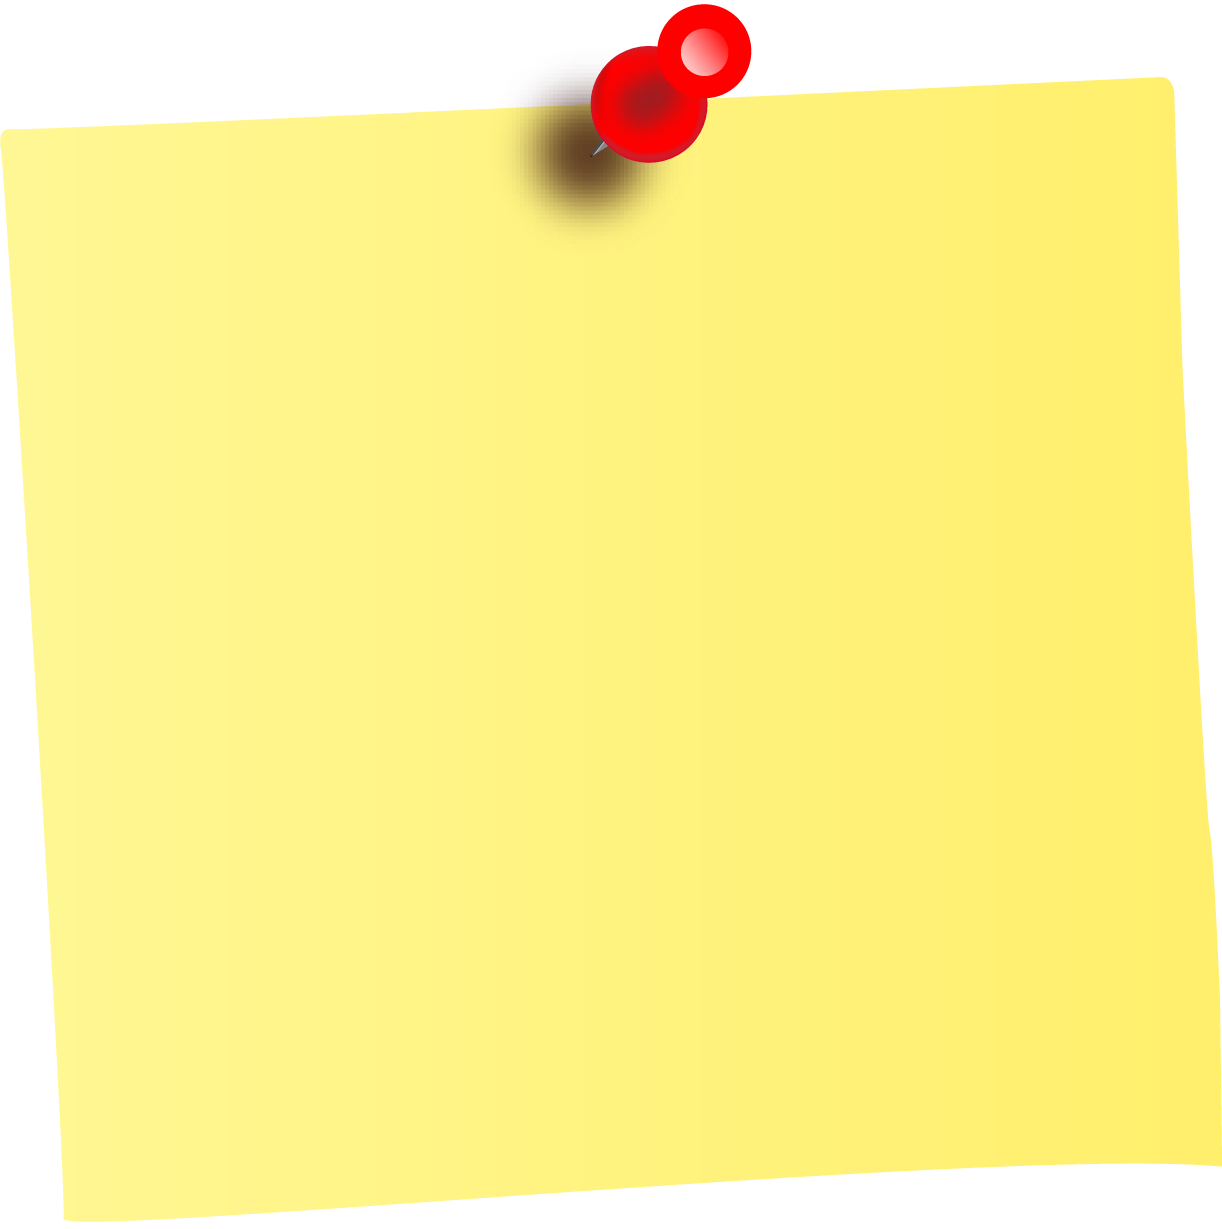 Sticky Notes PNG Photo Image